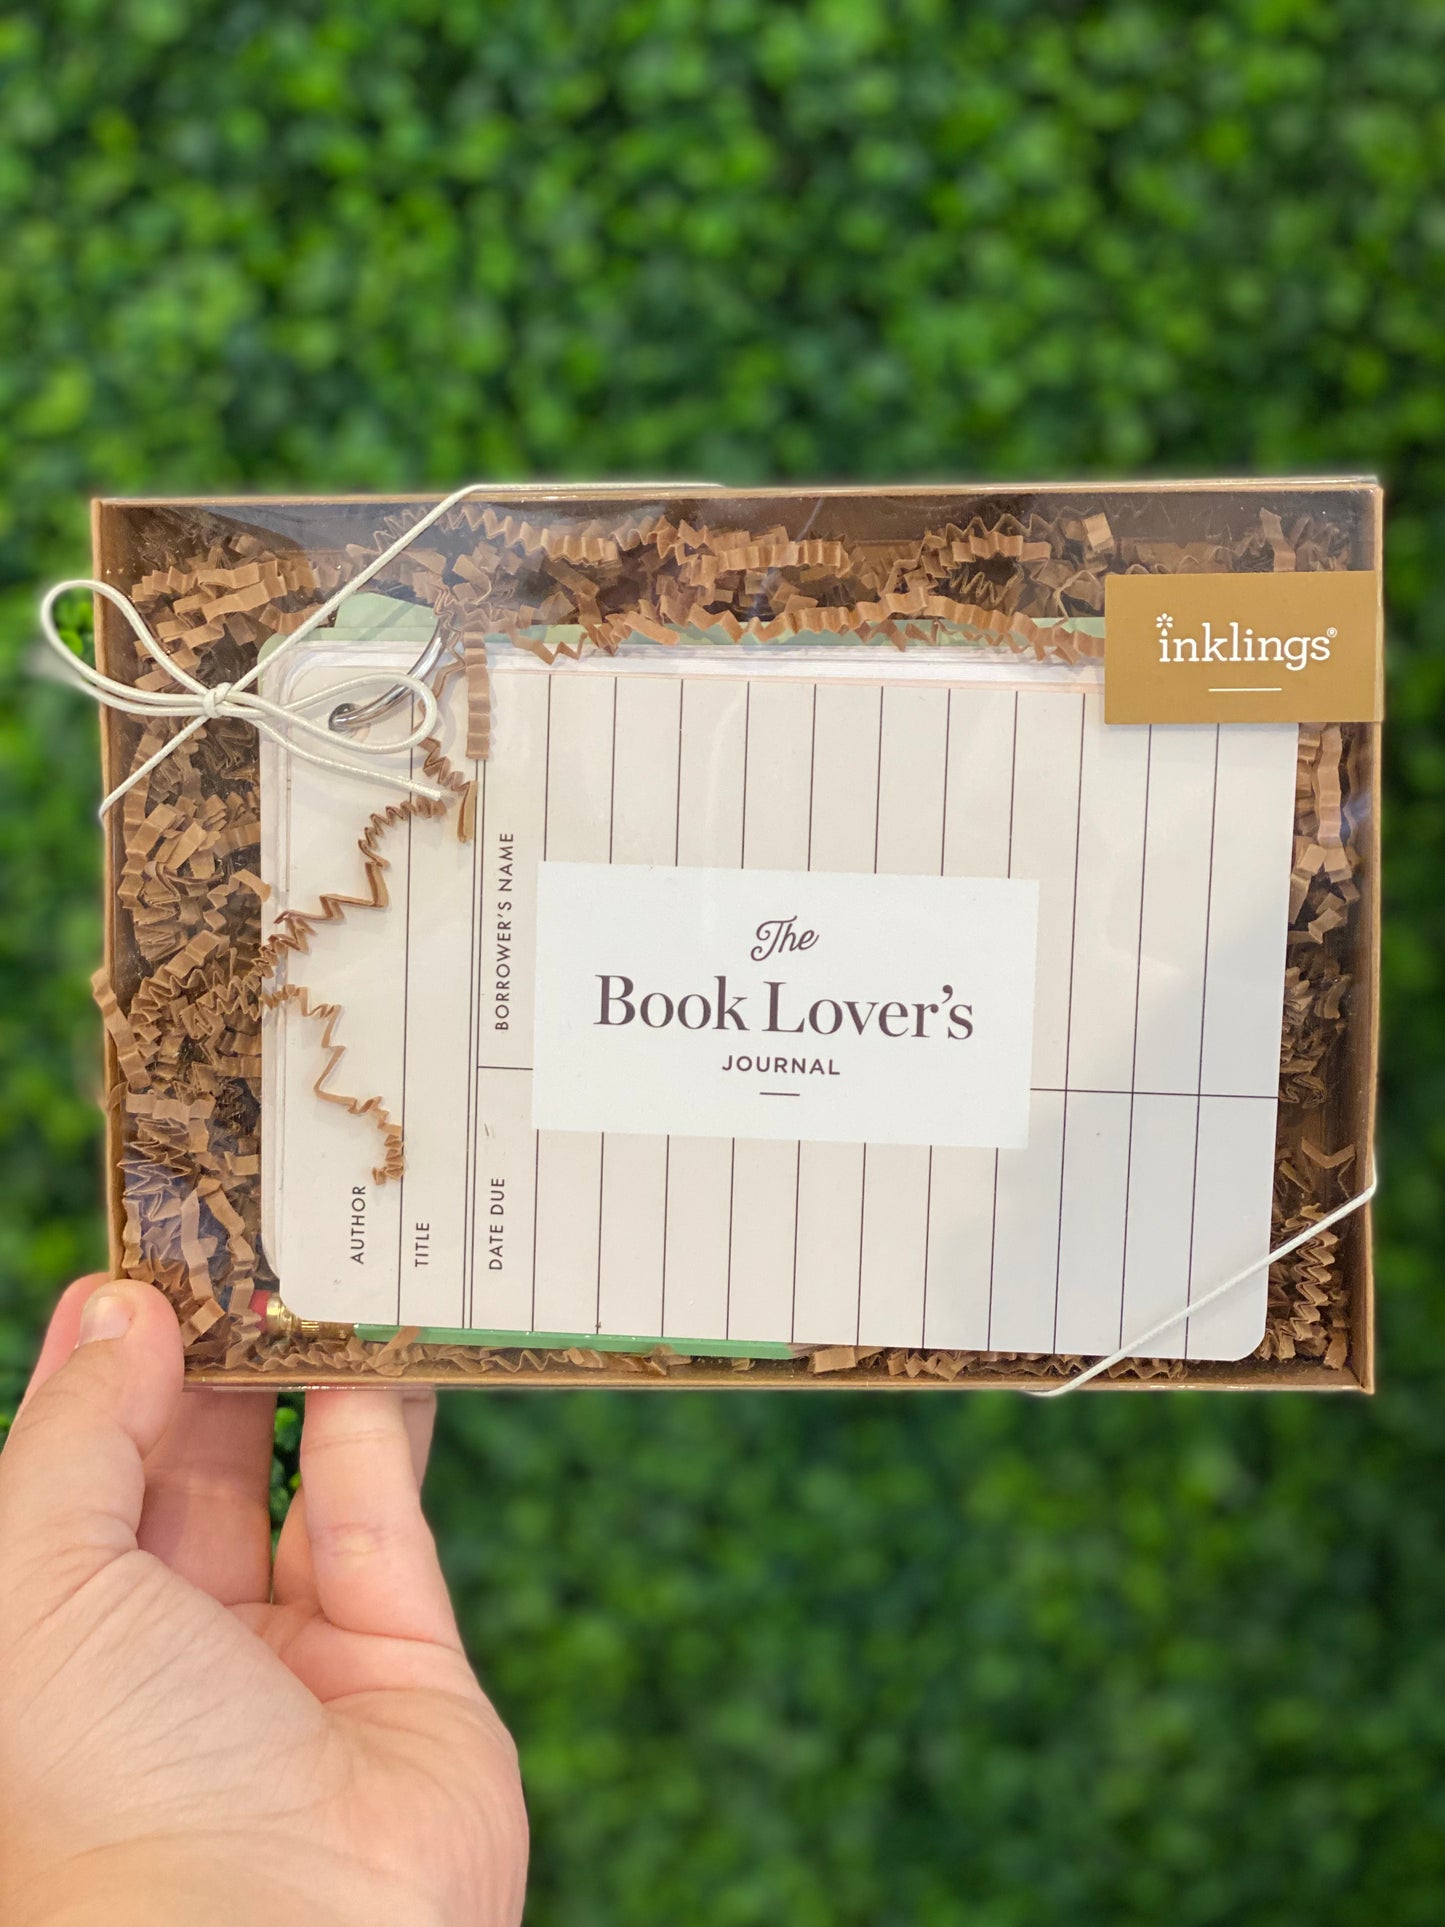 The book lovers journal